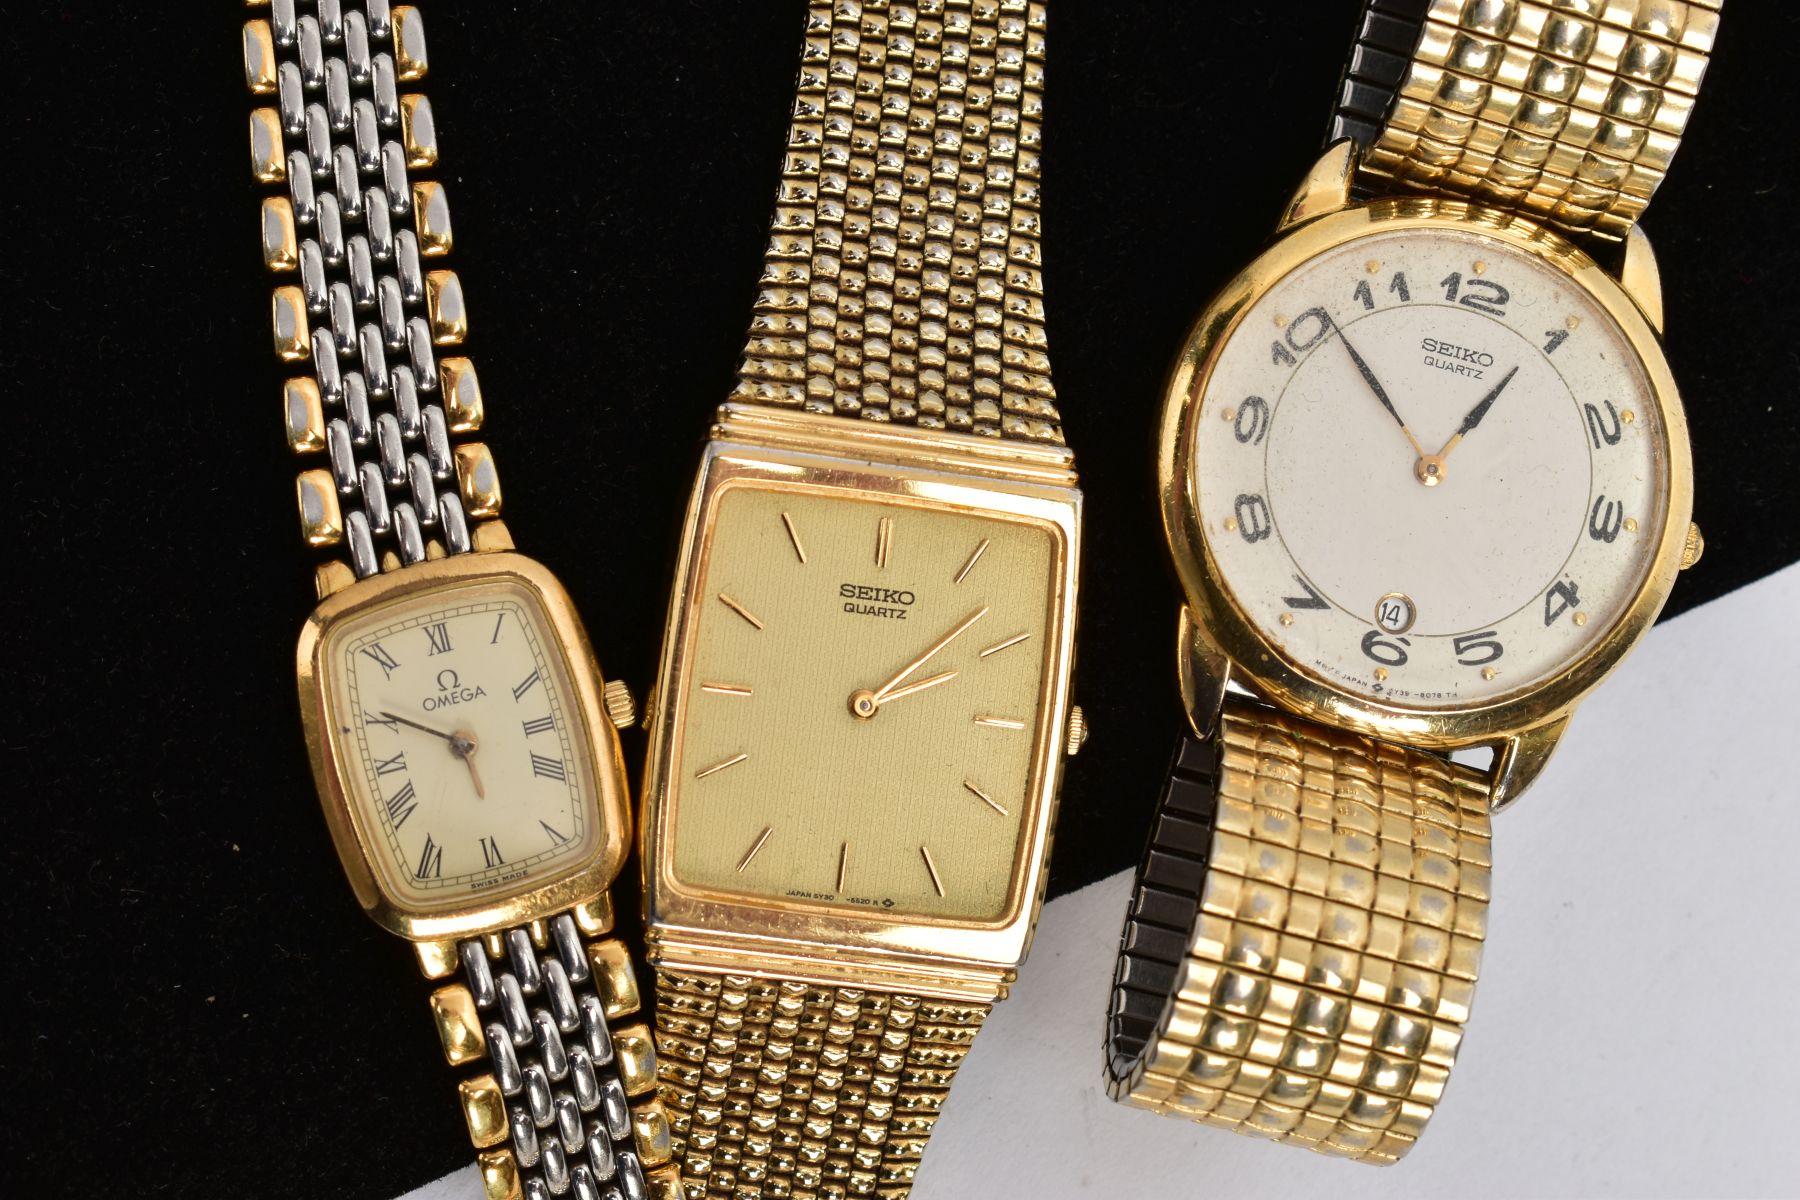 A LADIES 'OMEGA' WRISTWATCH AND TWO GENTS 'SEIKO' WRISTWATCHES, the ladies watch with a rounded - Image 2 of 4